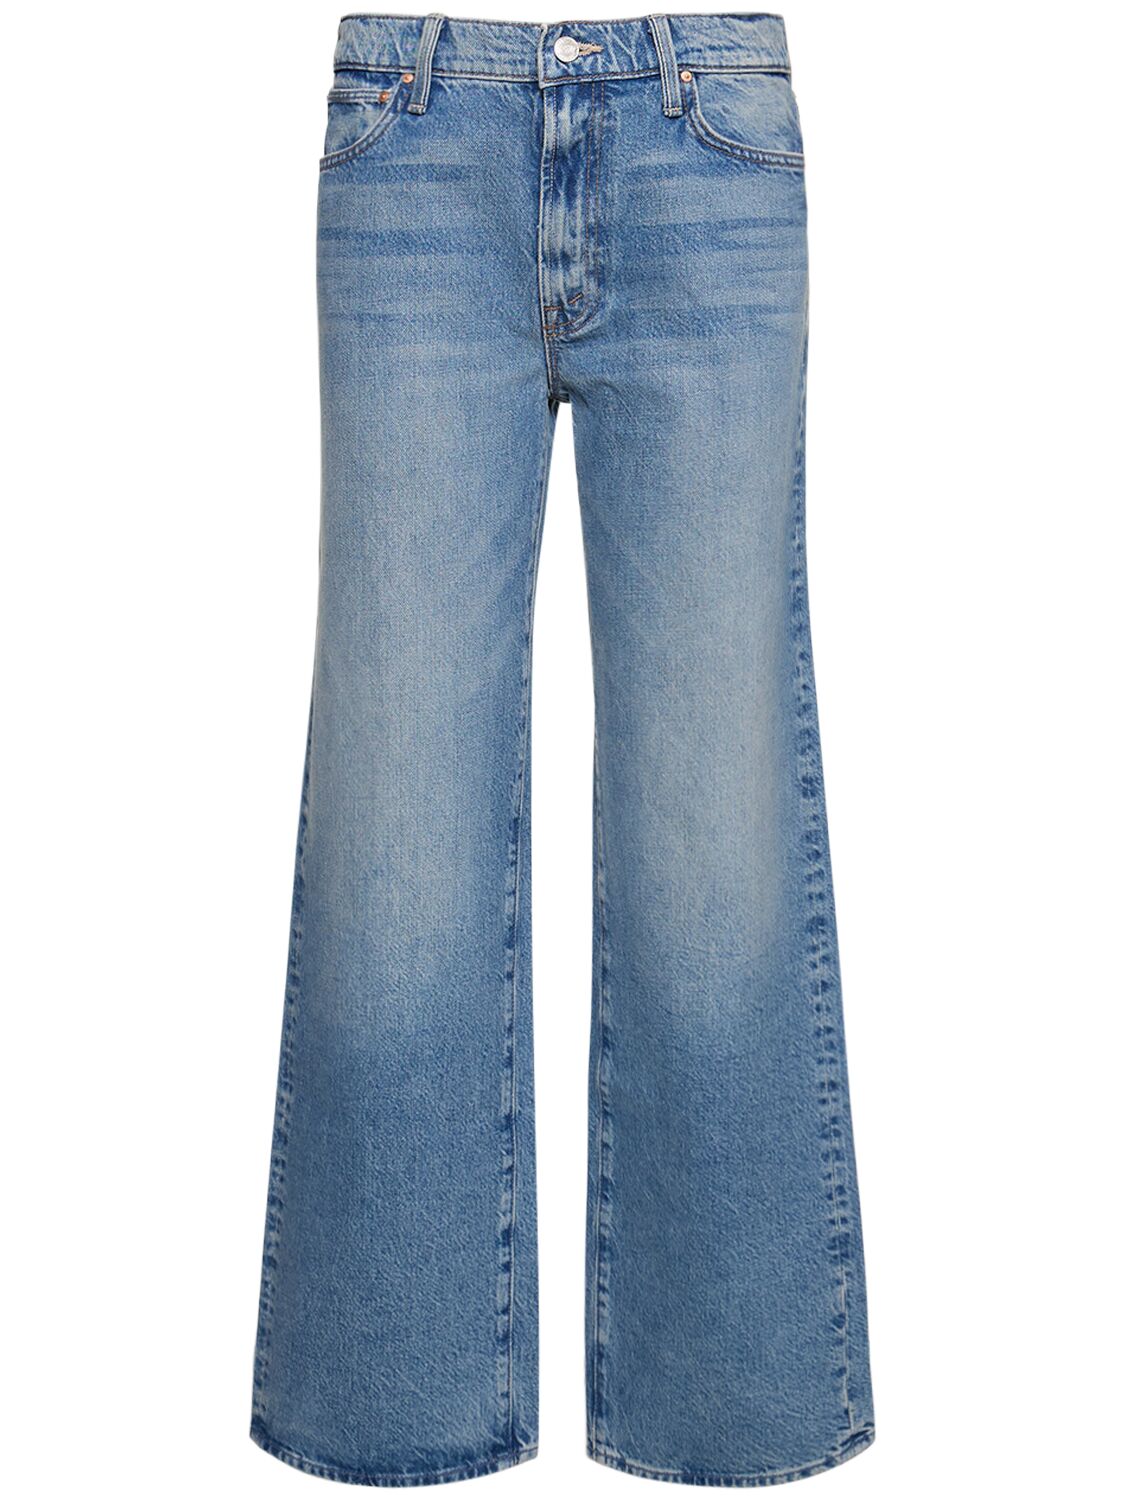 Image of The Dodger Sneak High Rise Jeans